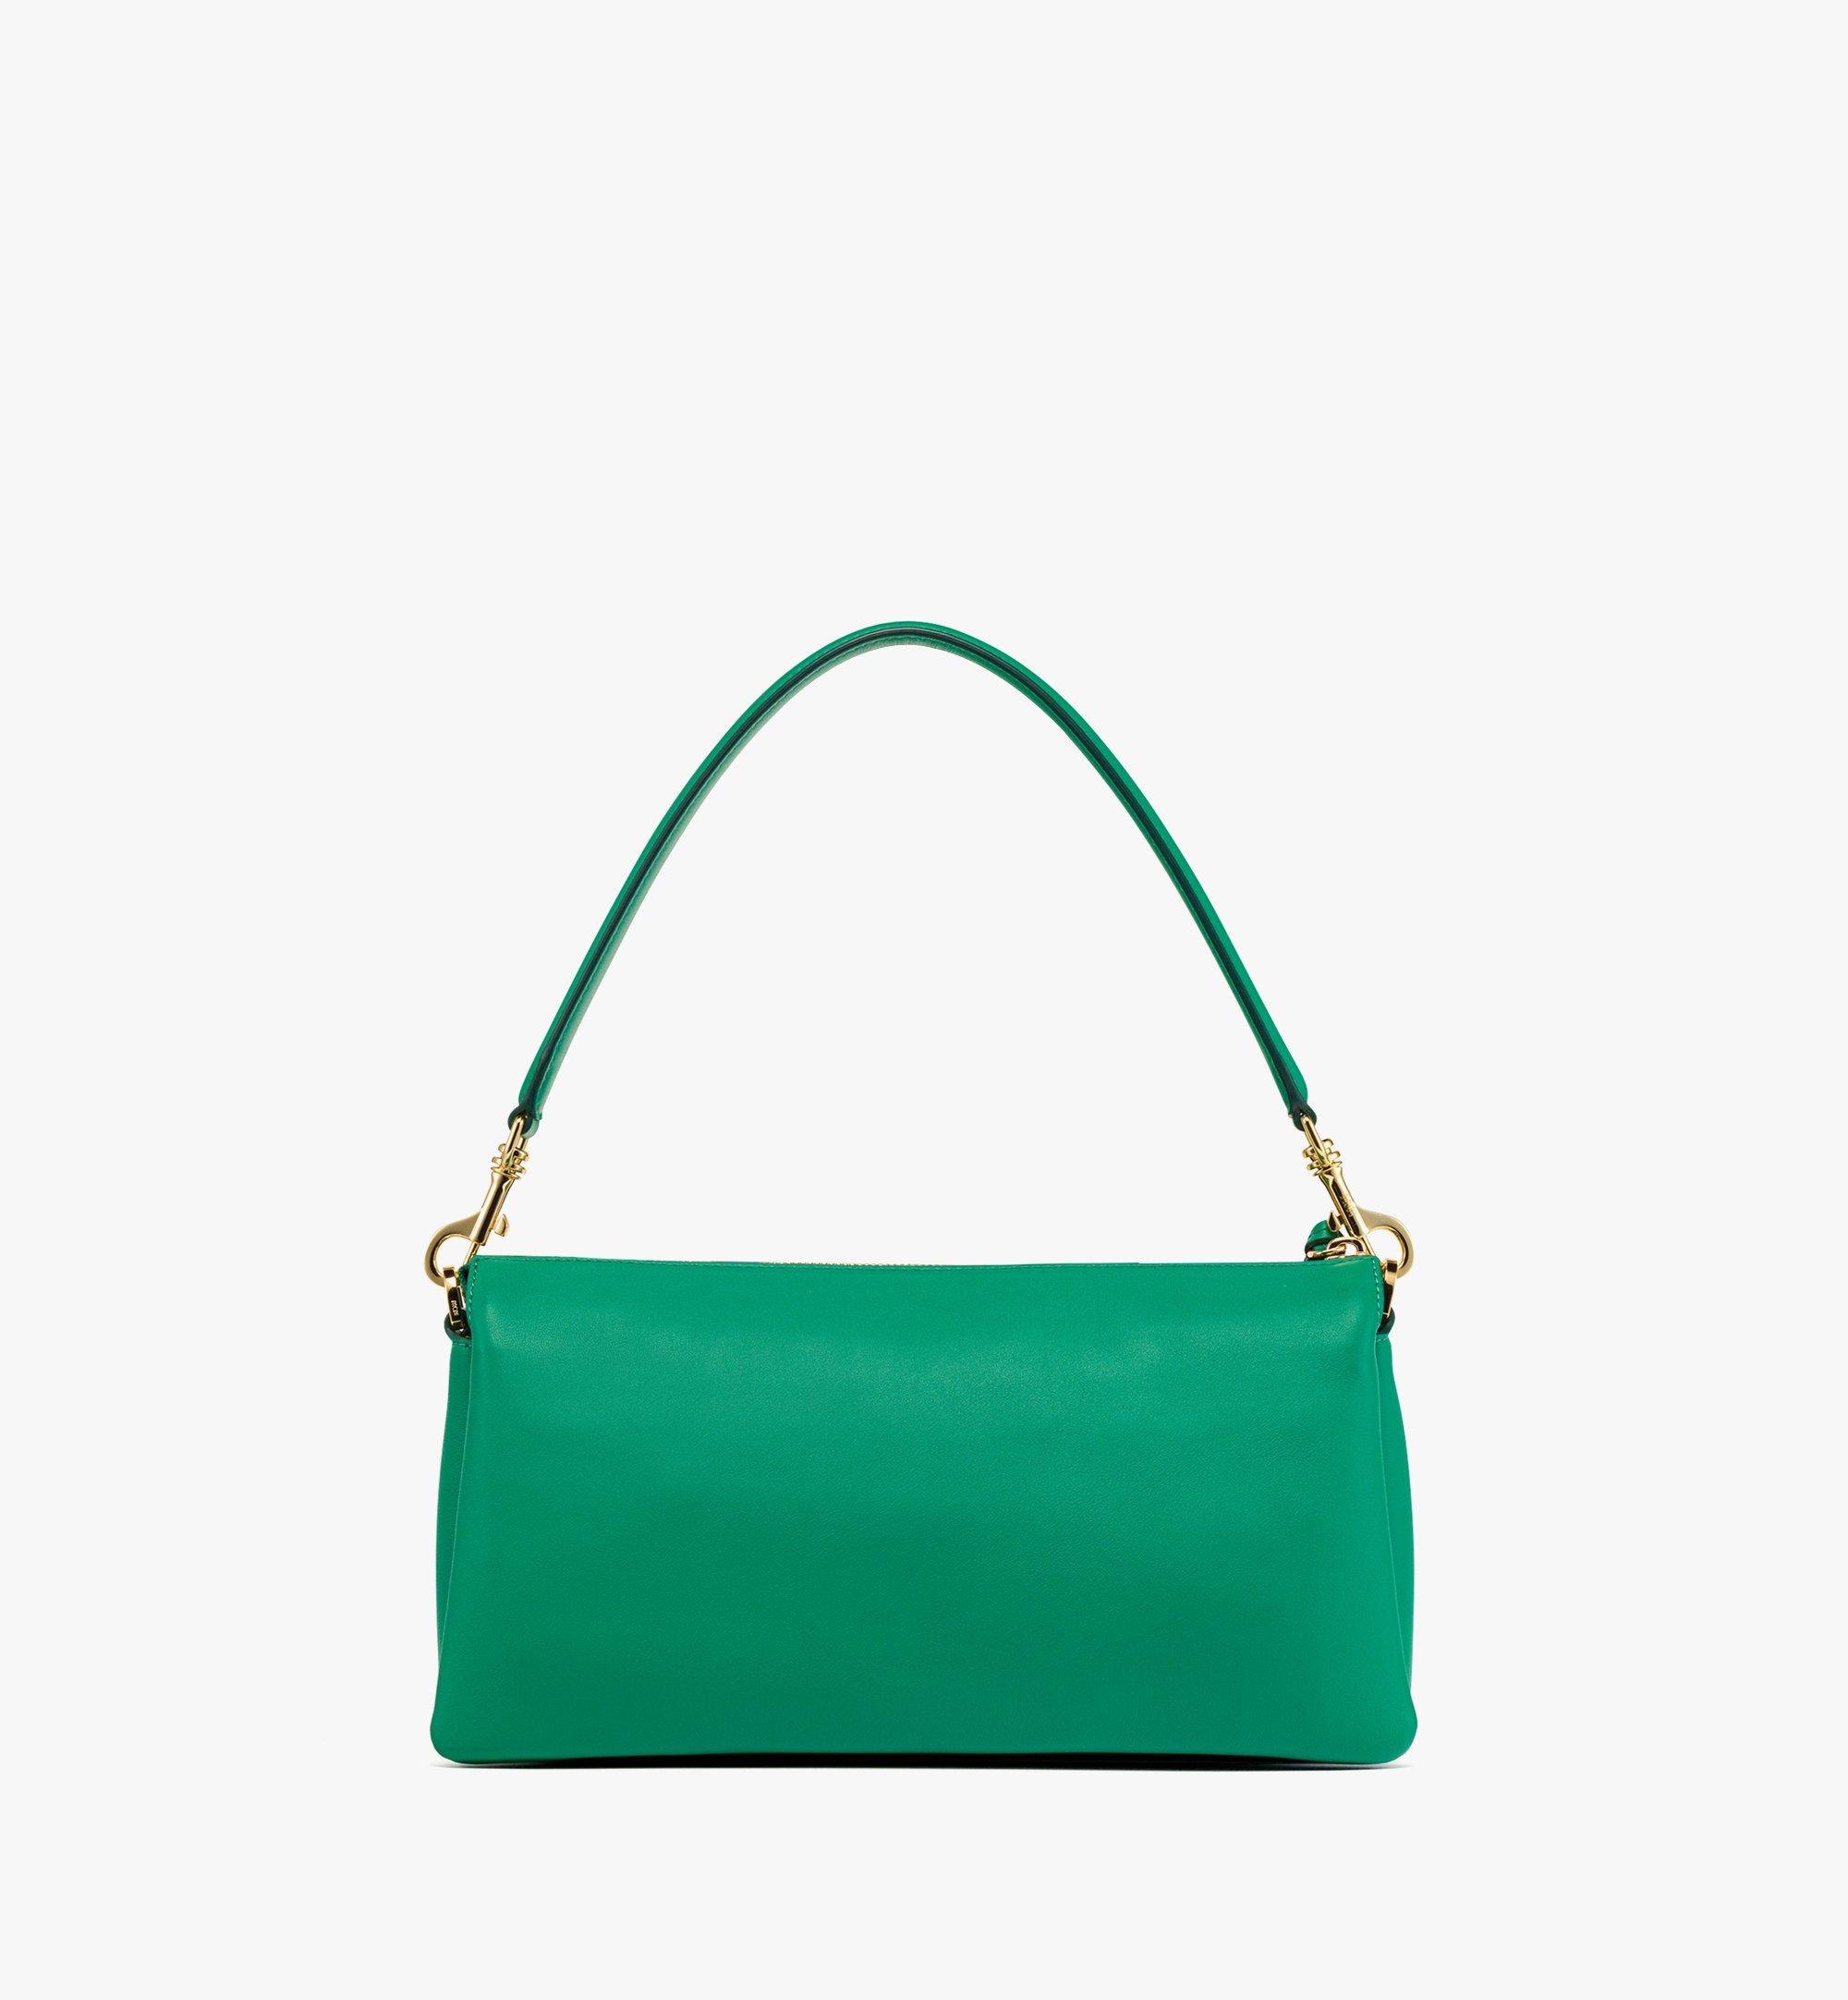 Mcm Small Travia Leather Shoulder Bag - Green